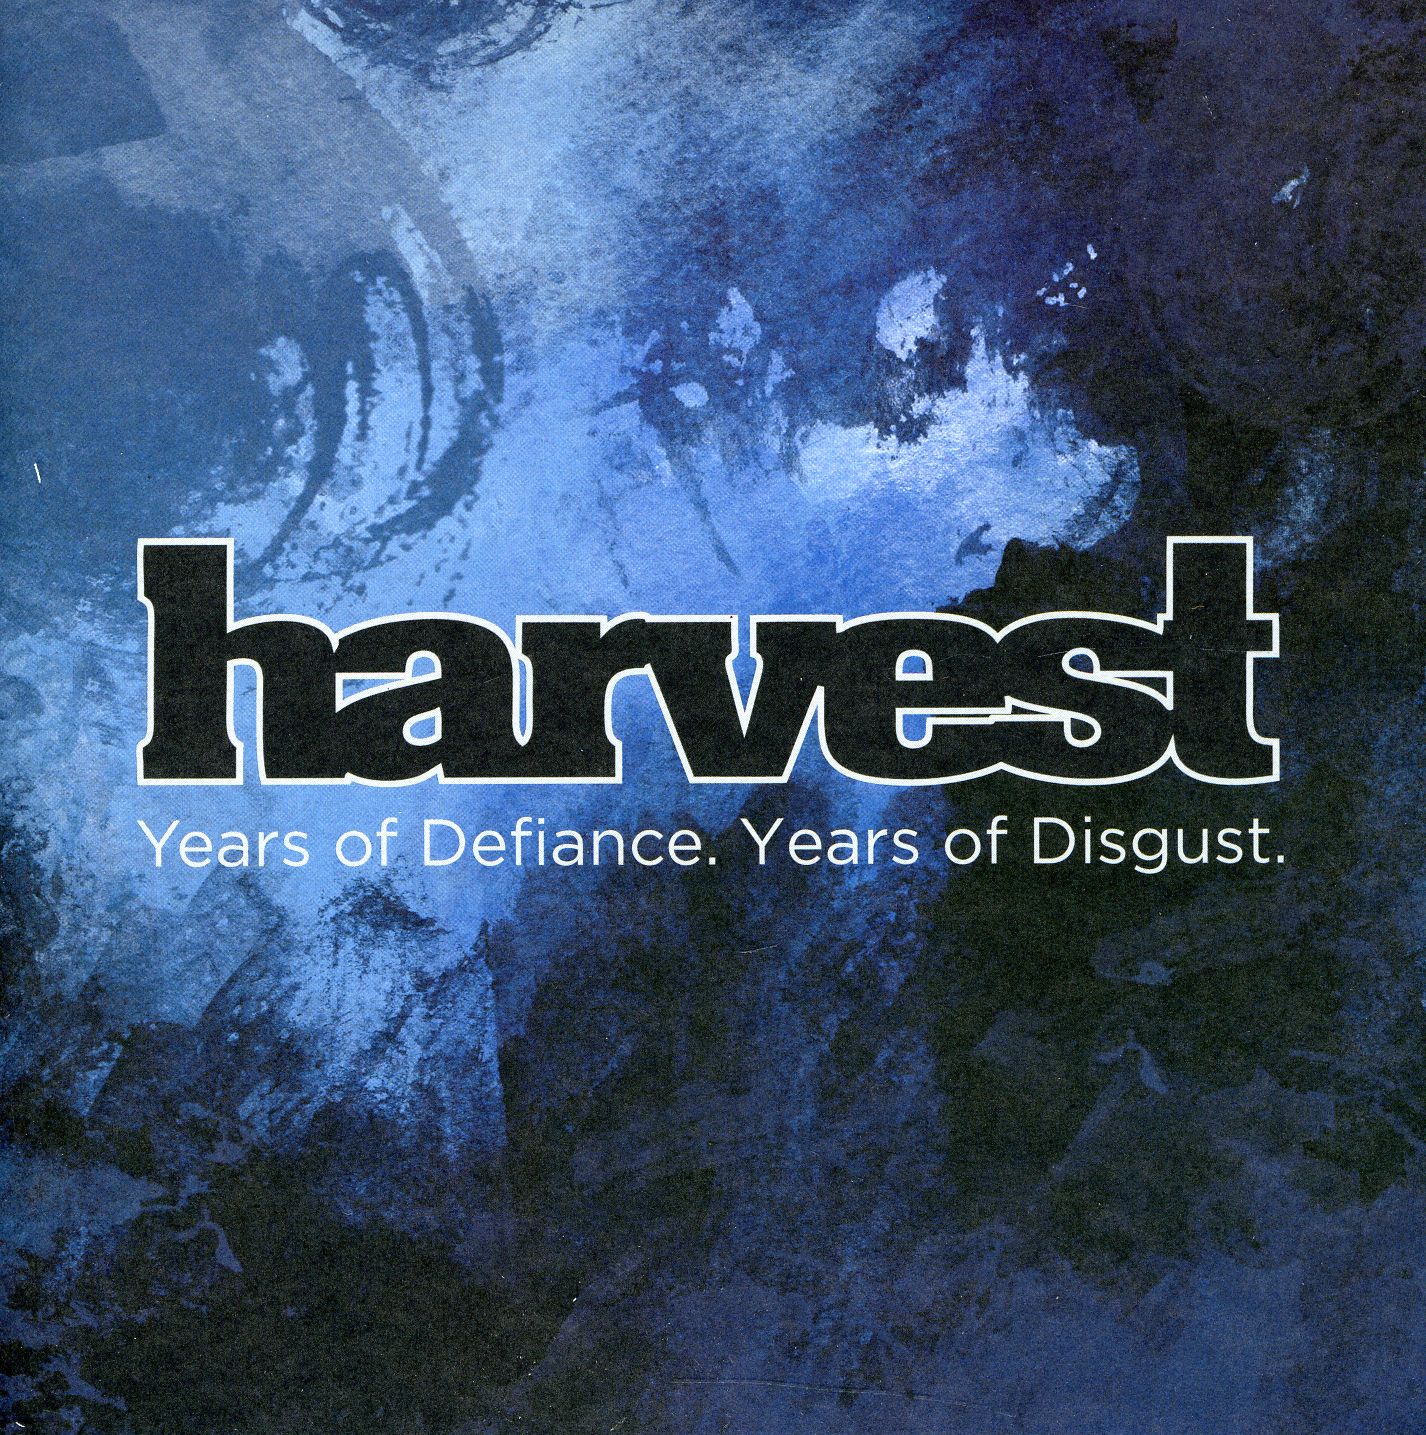 YEARS OF DEFIANCE YEARS OF DISGUST